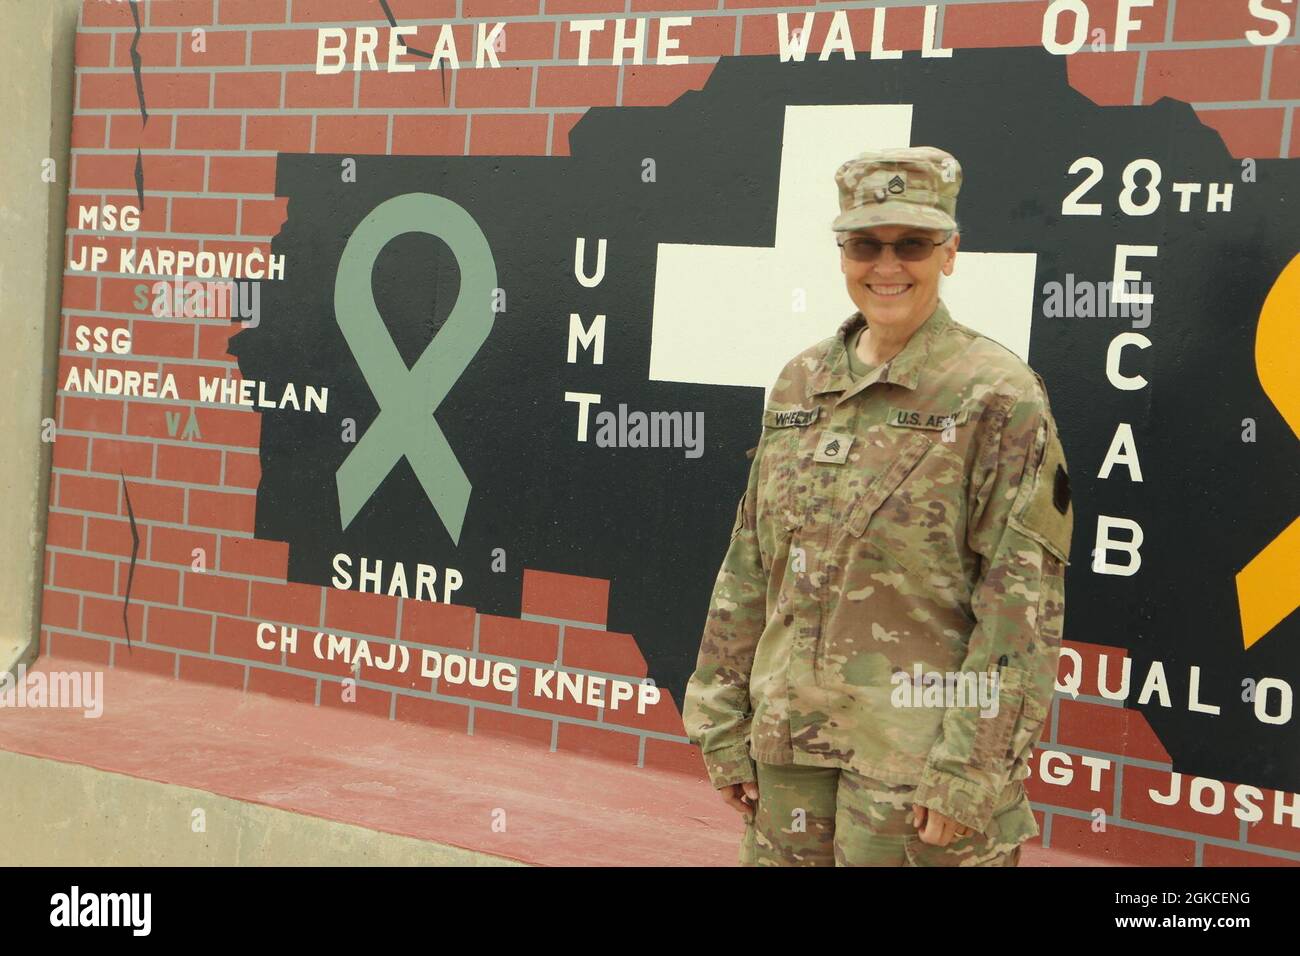 U.S. Army Staff Sgt. Andrea Whelan, victim advocate for the 28th Expeditionary Combat Aviation Brigade, poses for a photo at an airfield in the 28th ECAB's area of operations in the Middle East.     Whelan enlisted in the U.S. Army at age 32 after losing a truth or dare bet. She says that someone told her she would not make through basic training, and now she is standing at retirement's doorstep. She is currently attending Liberty University pursuing a bachelor's degree in psychology.    'Women's month is a time of reflection for me', said Whelan. 'I look at all the of the great women who forg Stock Photo